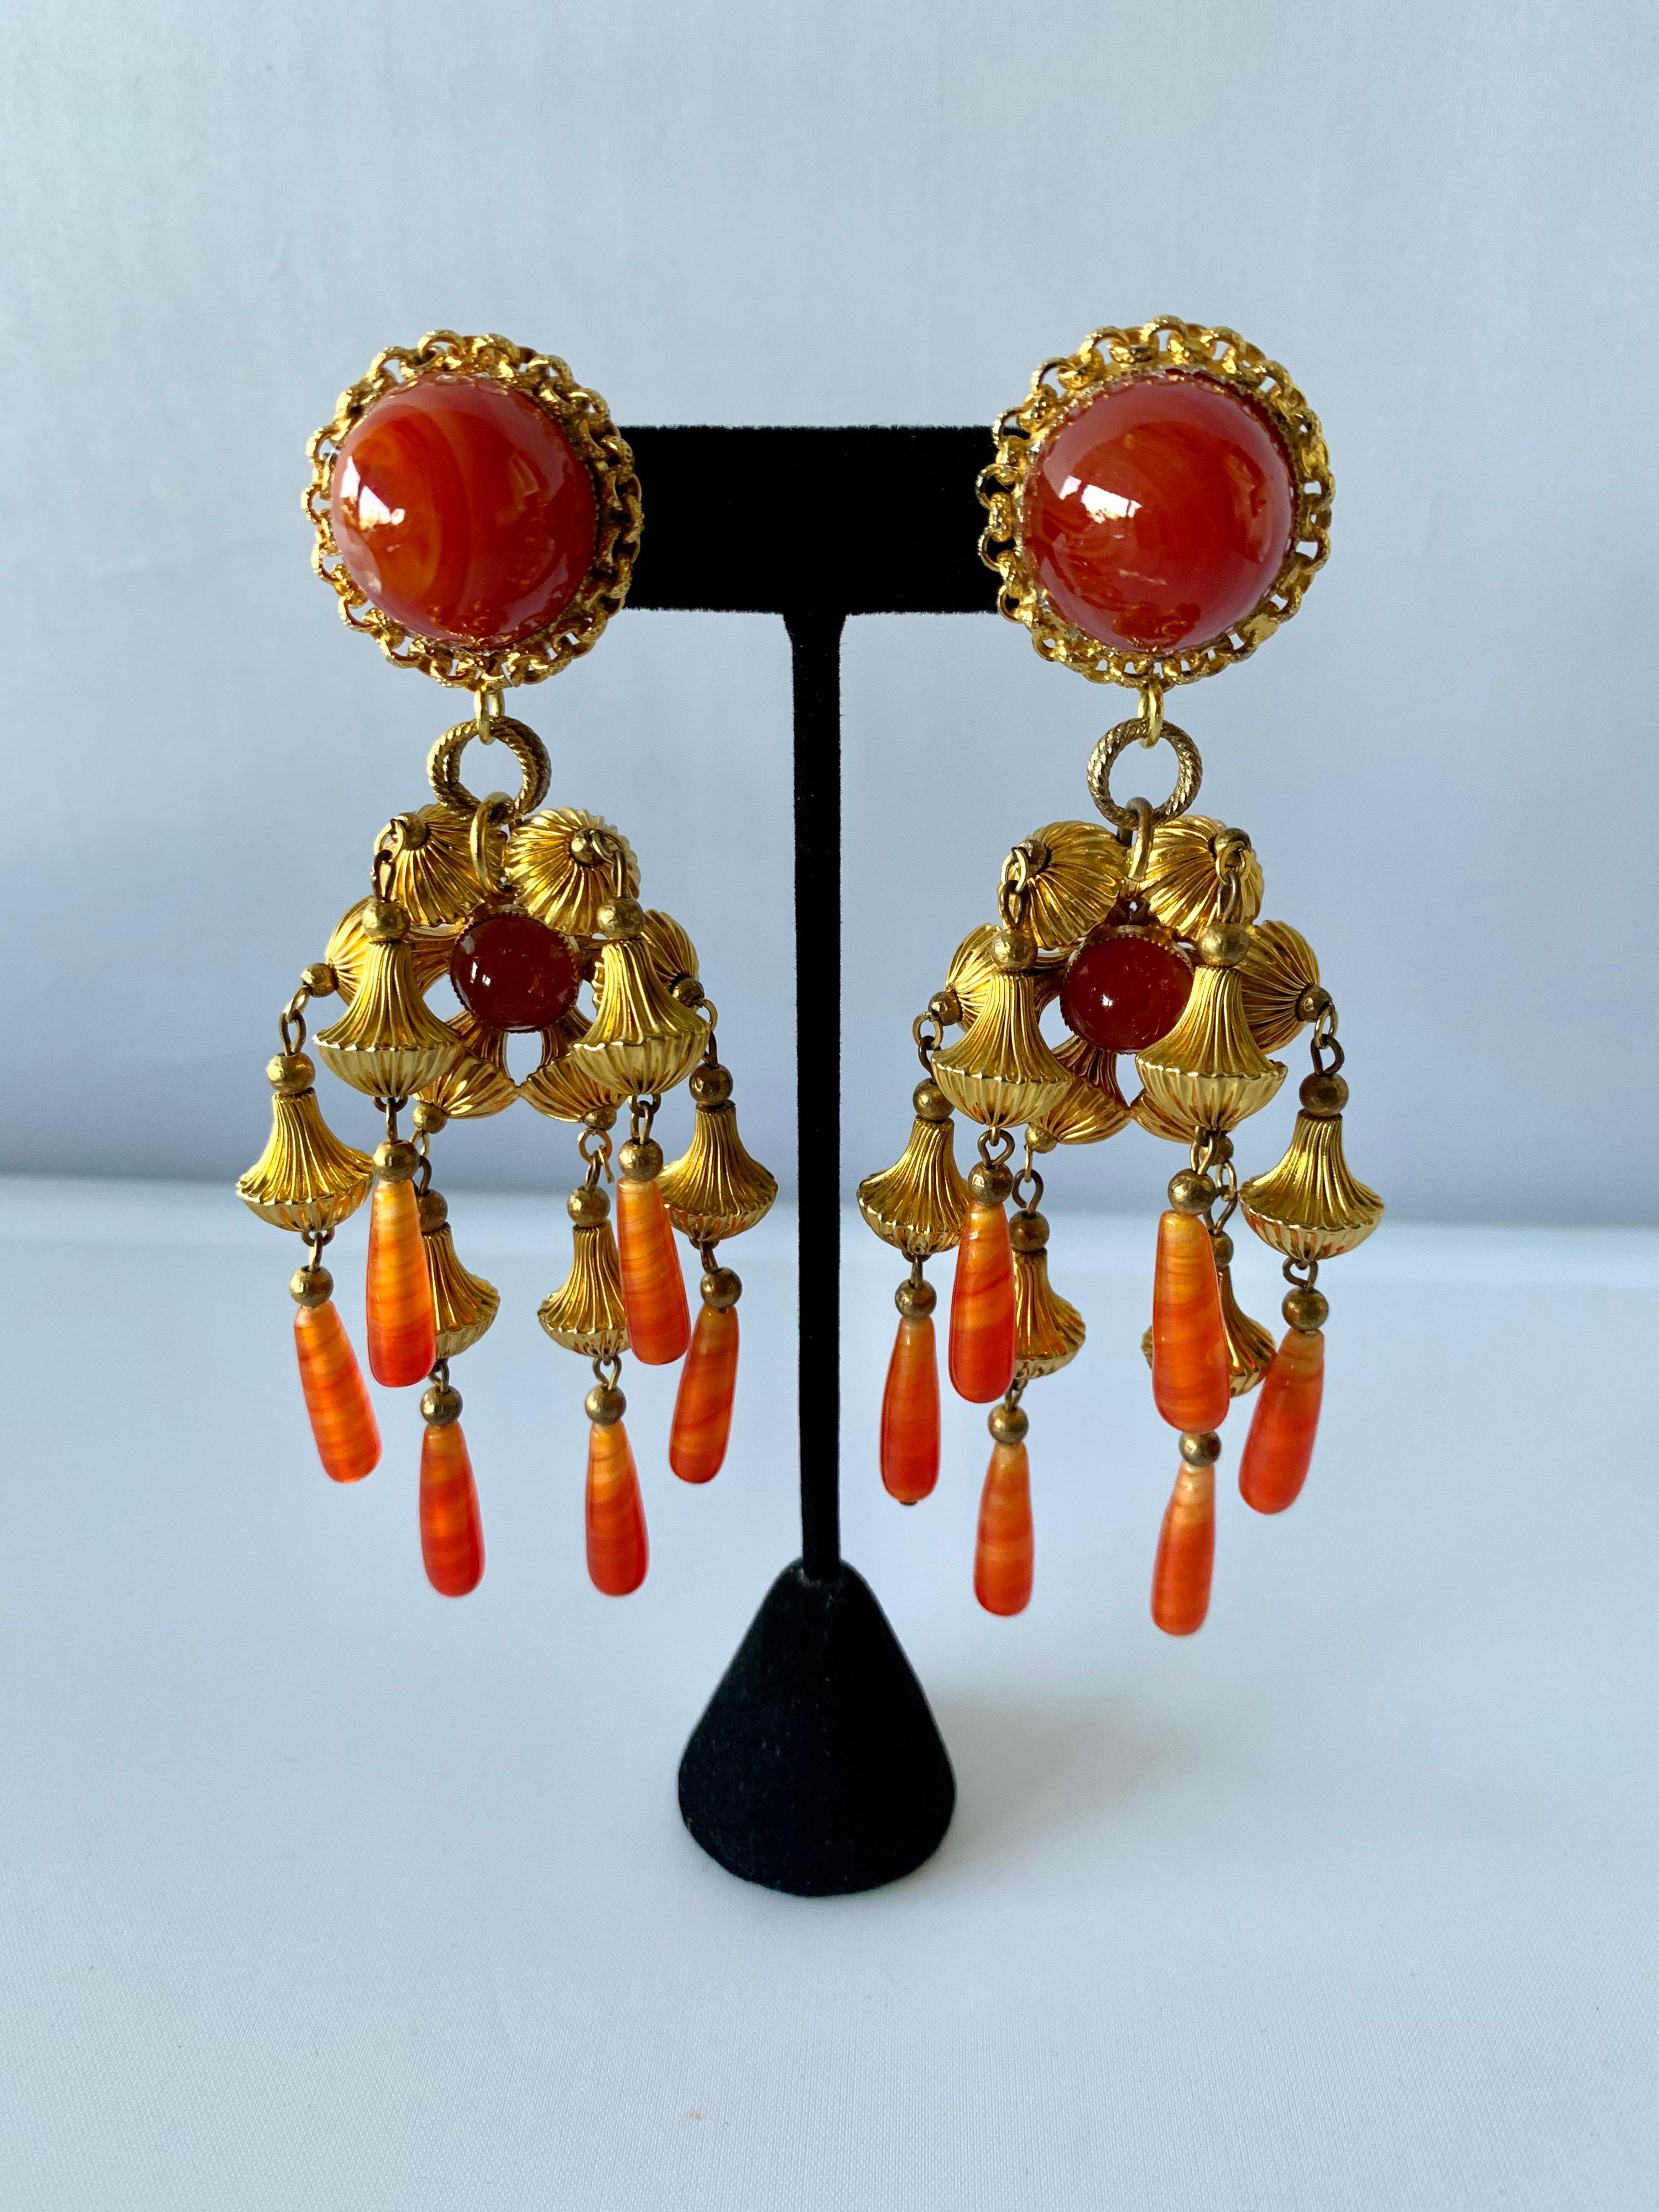 Vintage mid-century statement clip-on earrings comprised out of ornate gilt-metal beads and faux glass carnelian cabochons. The earrings have an oriental design, designed by William de Lillo circa 1969.